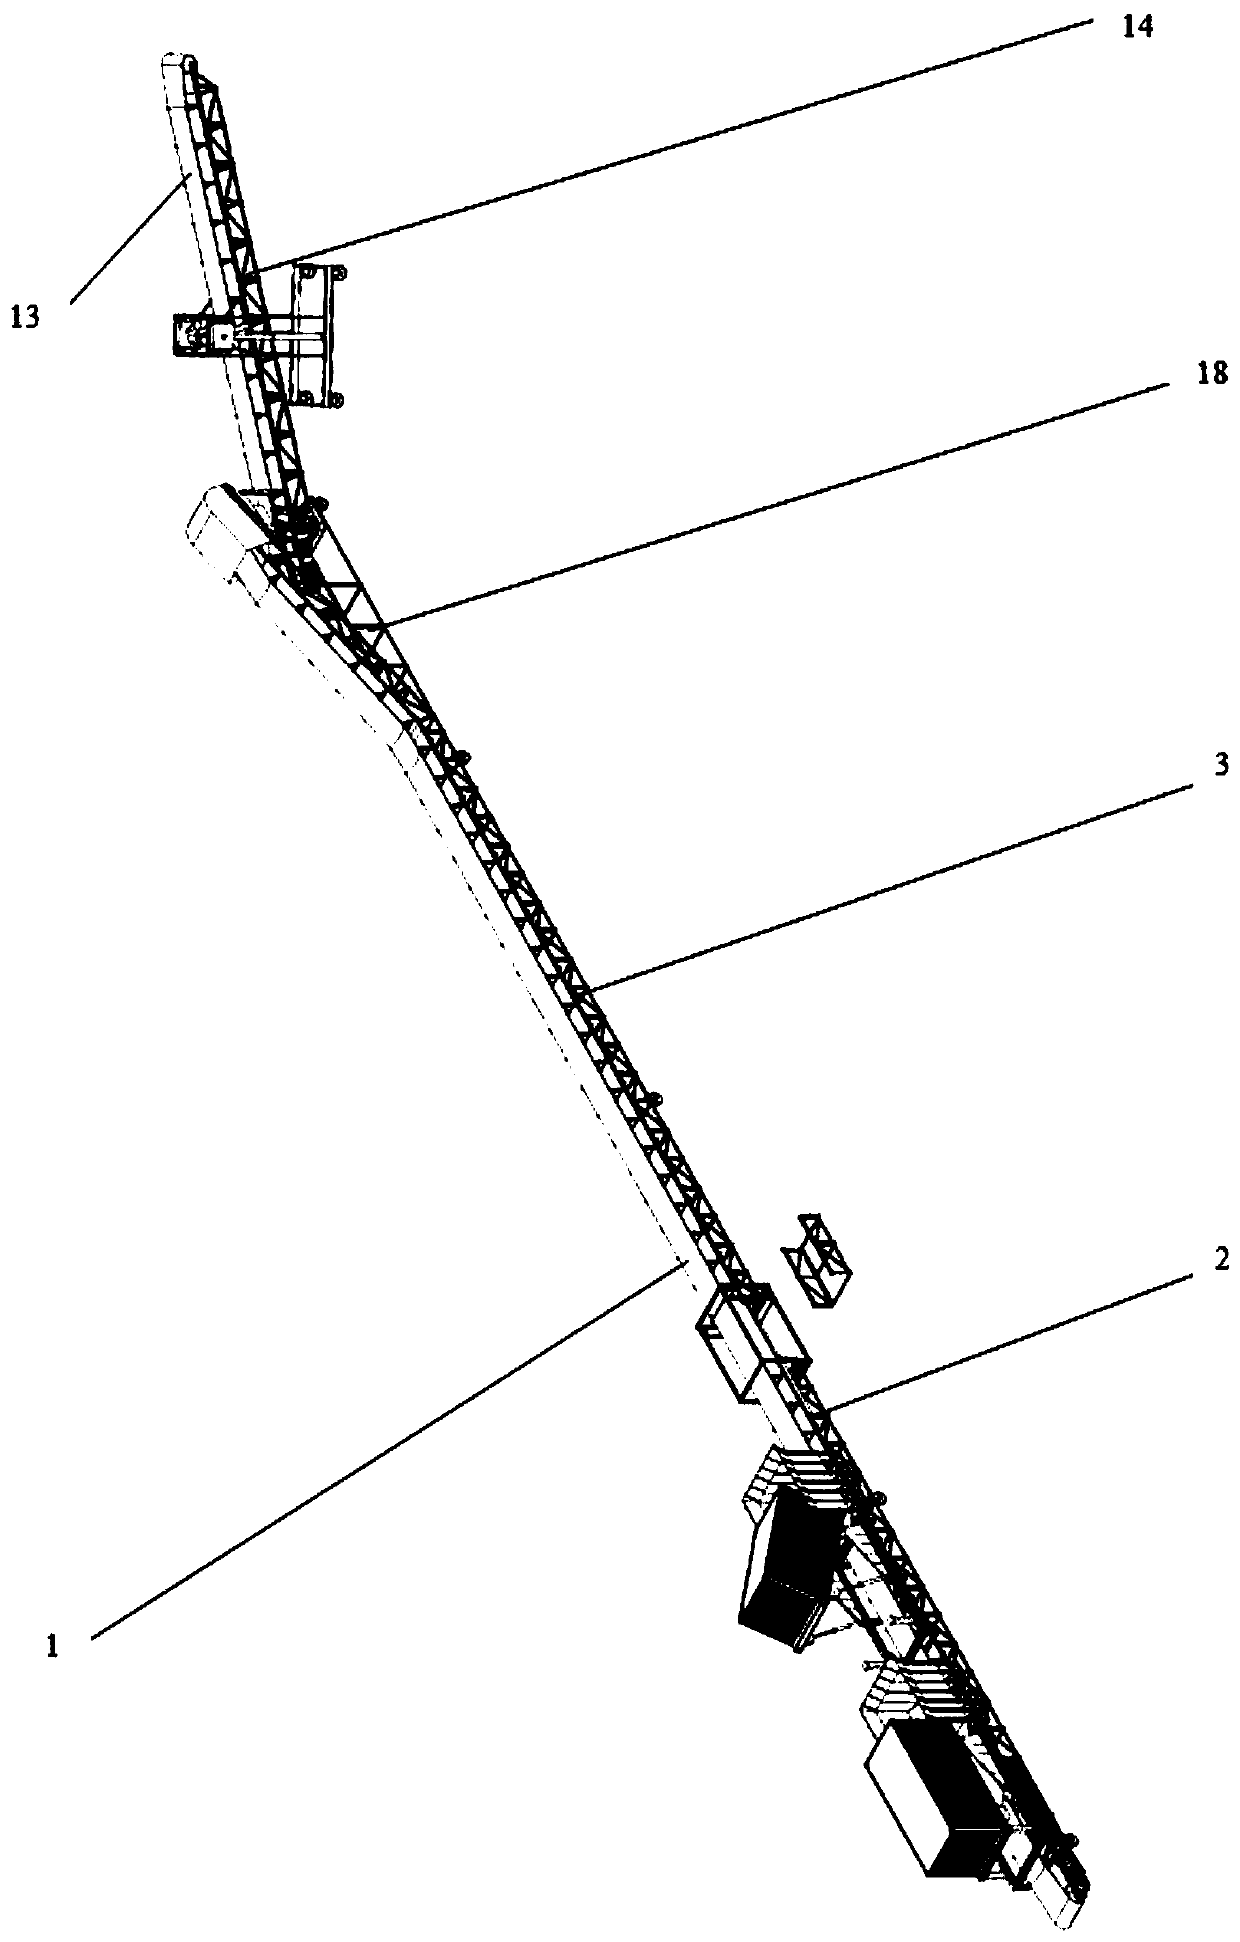 Telescopic integrated system for port coke unloading and stacking